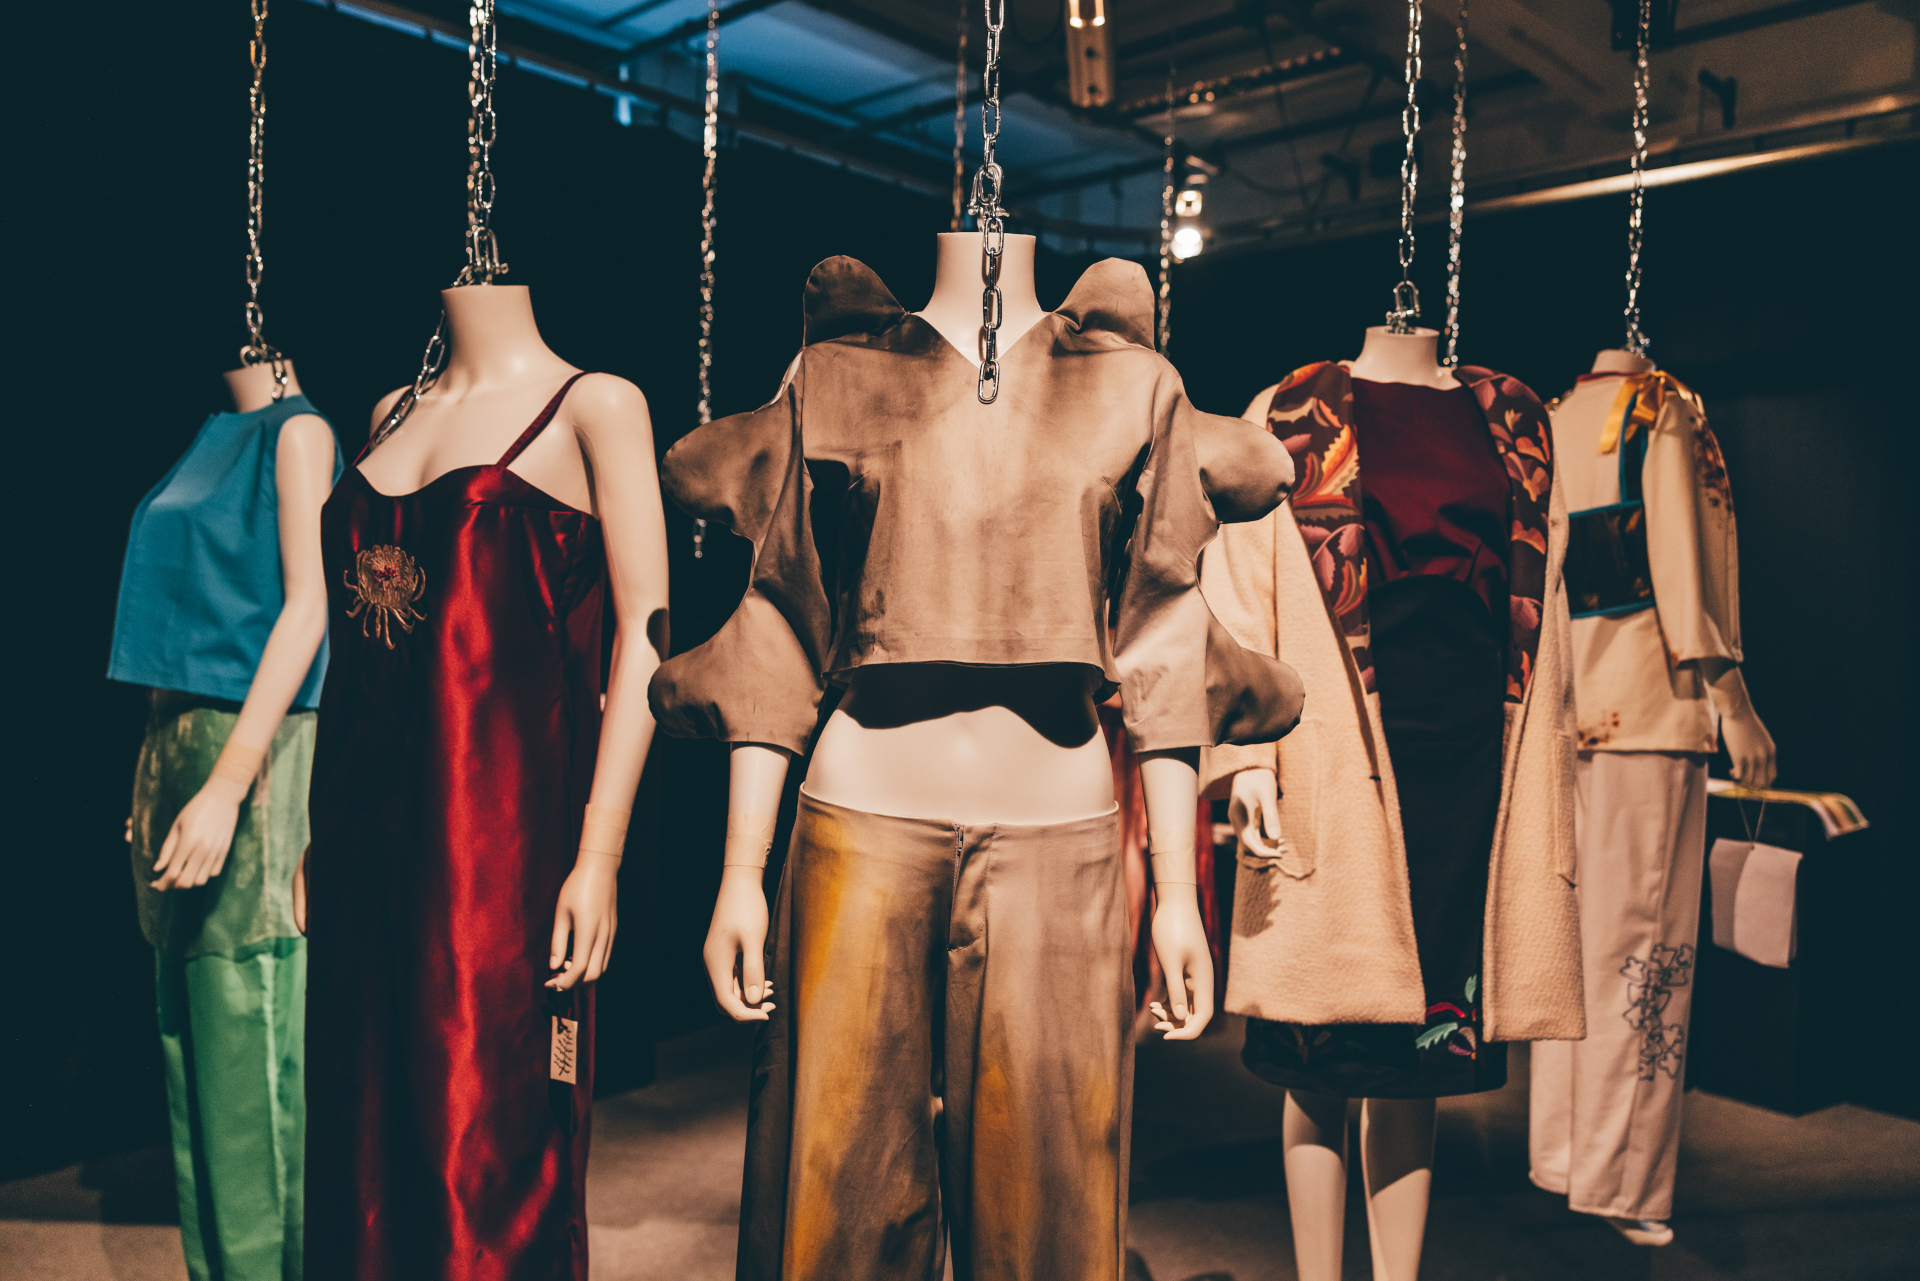 Headless mannequins in clothes designs hanging from ceiling